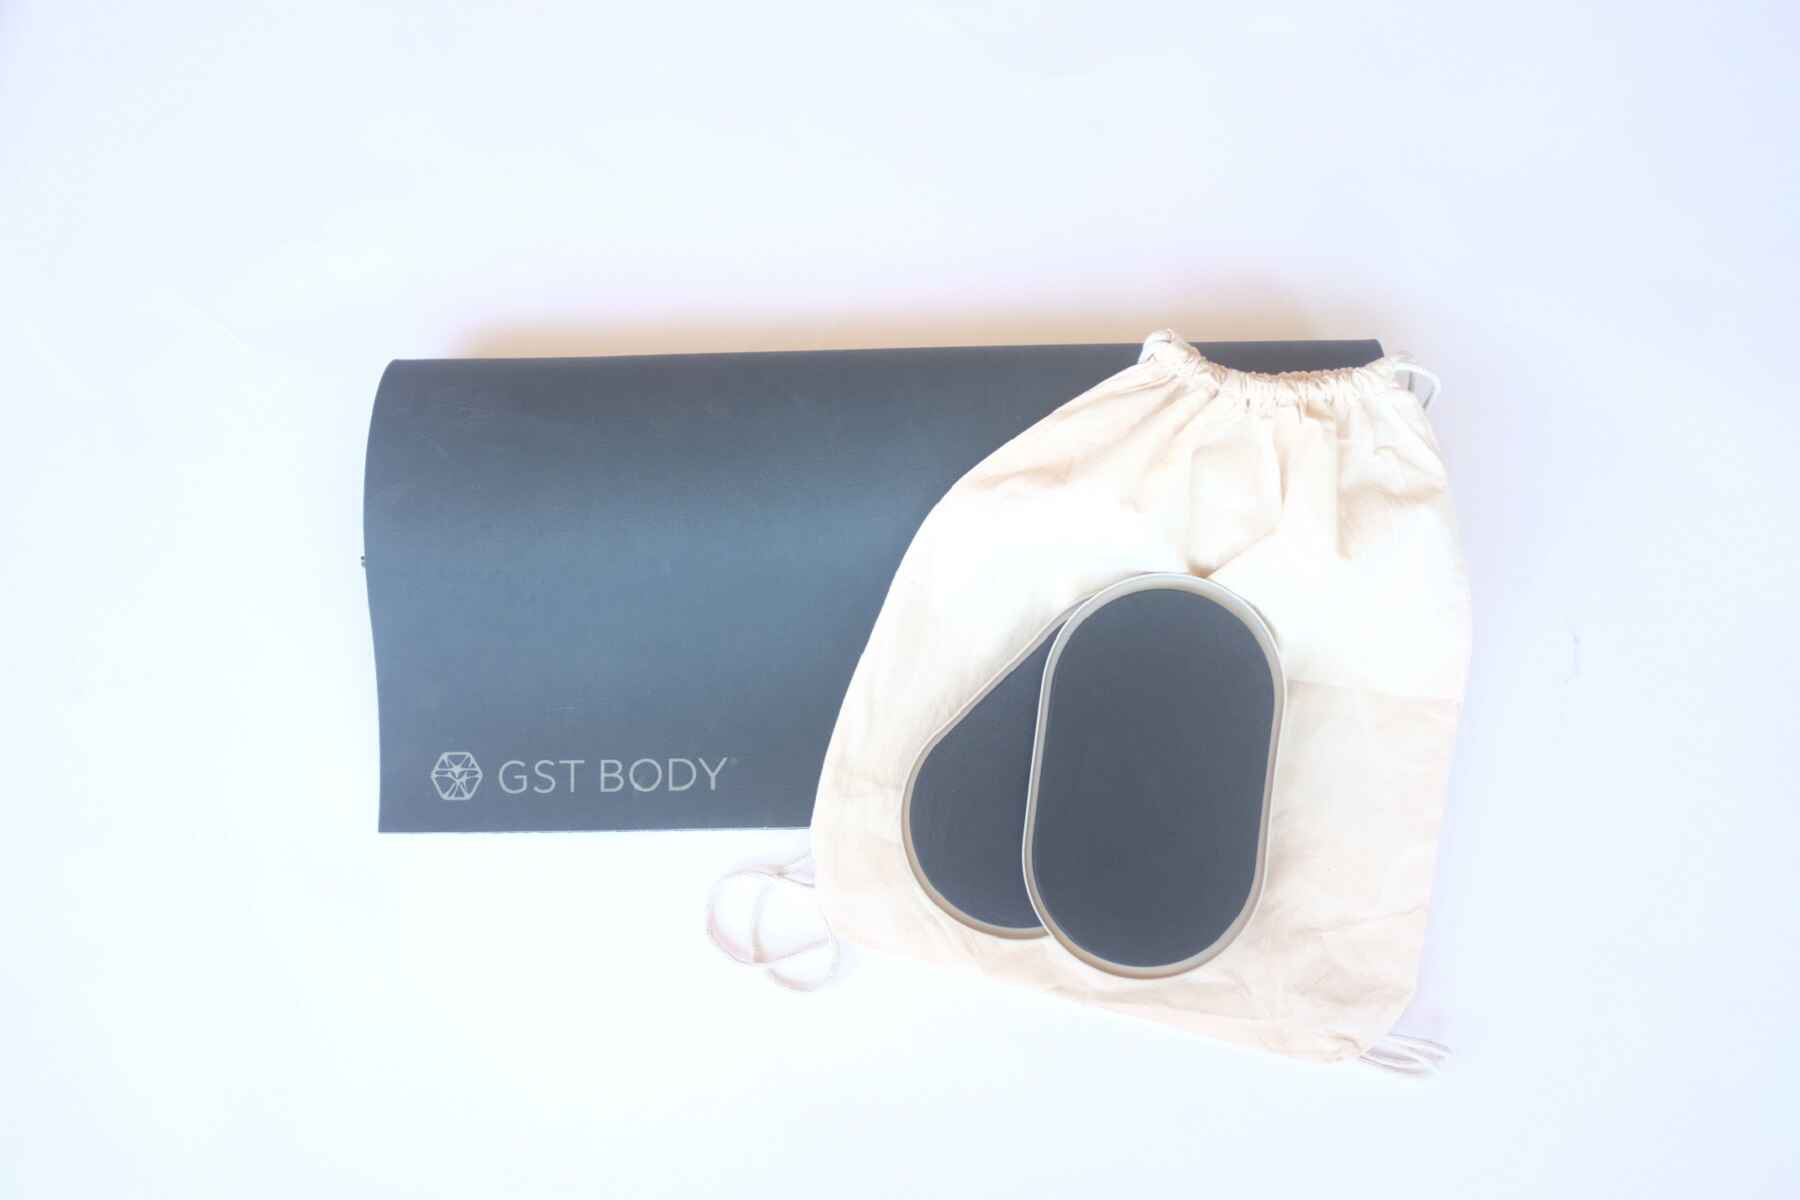 KINETIX COLLECTION – thegstbody